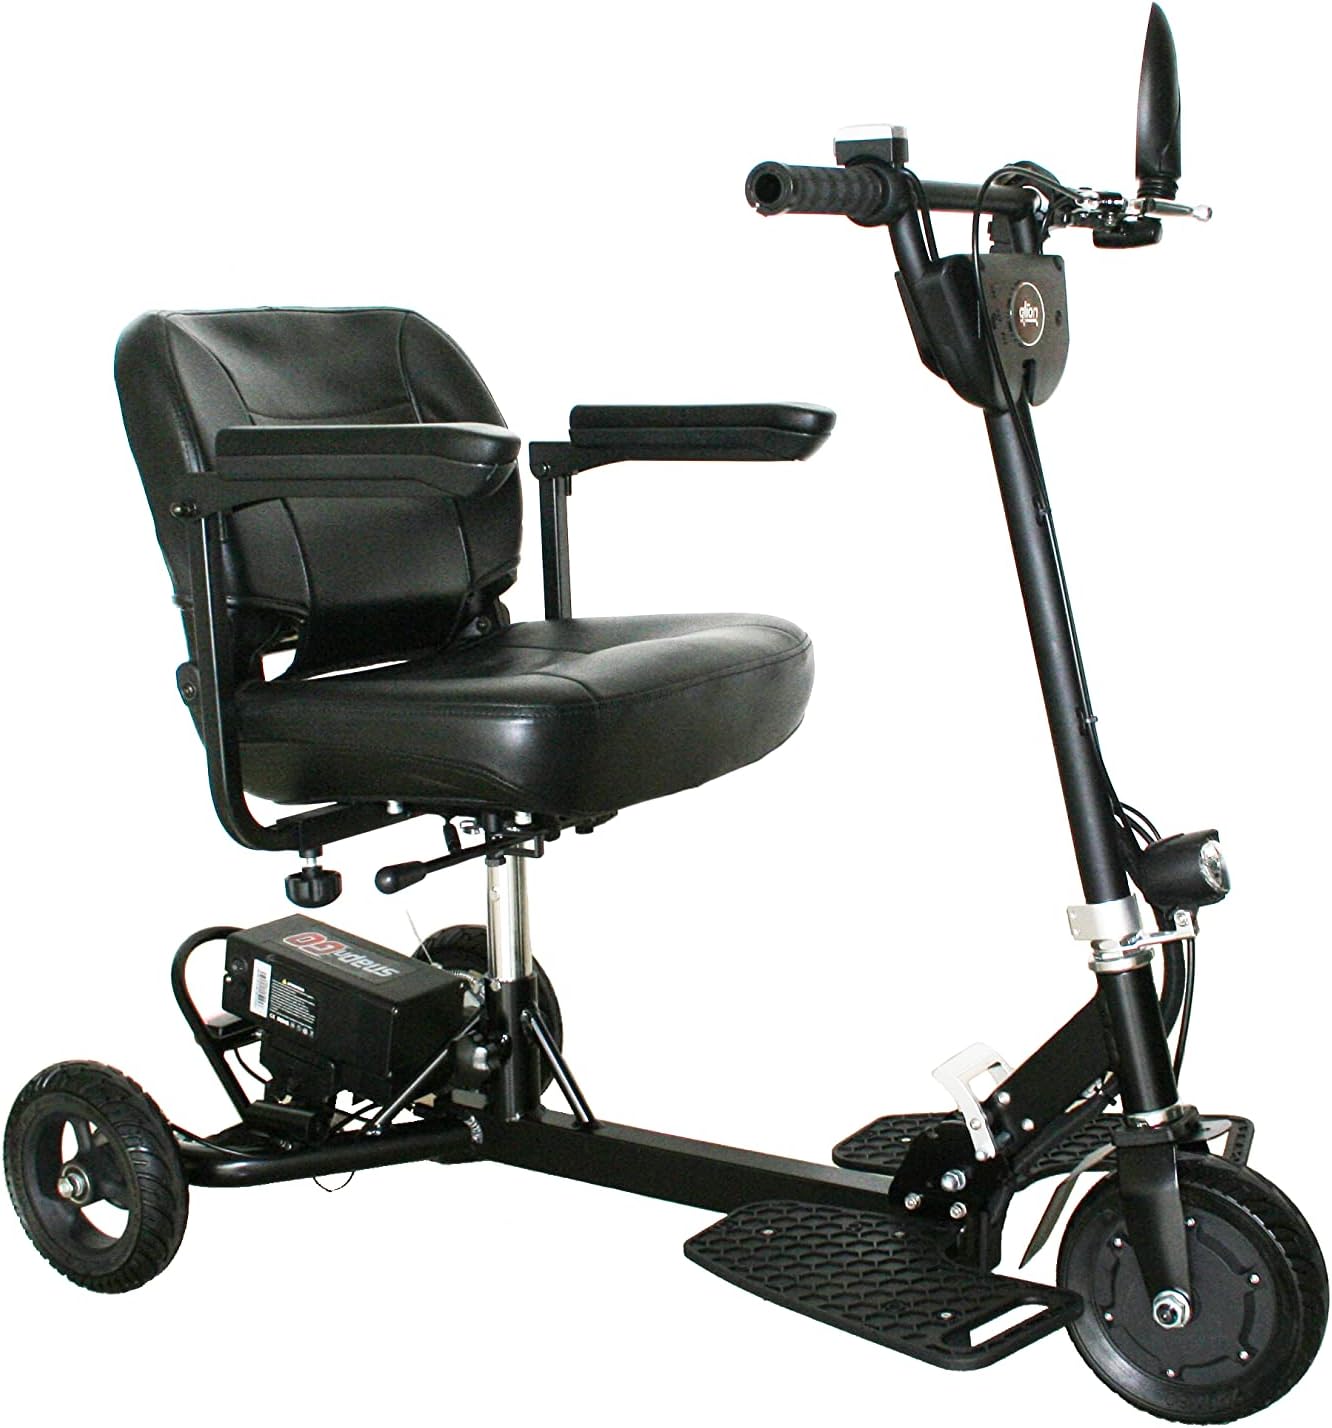 Glion SNAPnGO 3 Wheel Portable Mobility Adult Scooter- Online Only - Midwest DME Supply